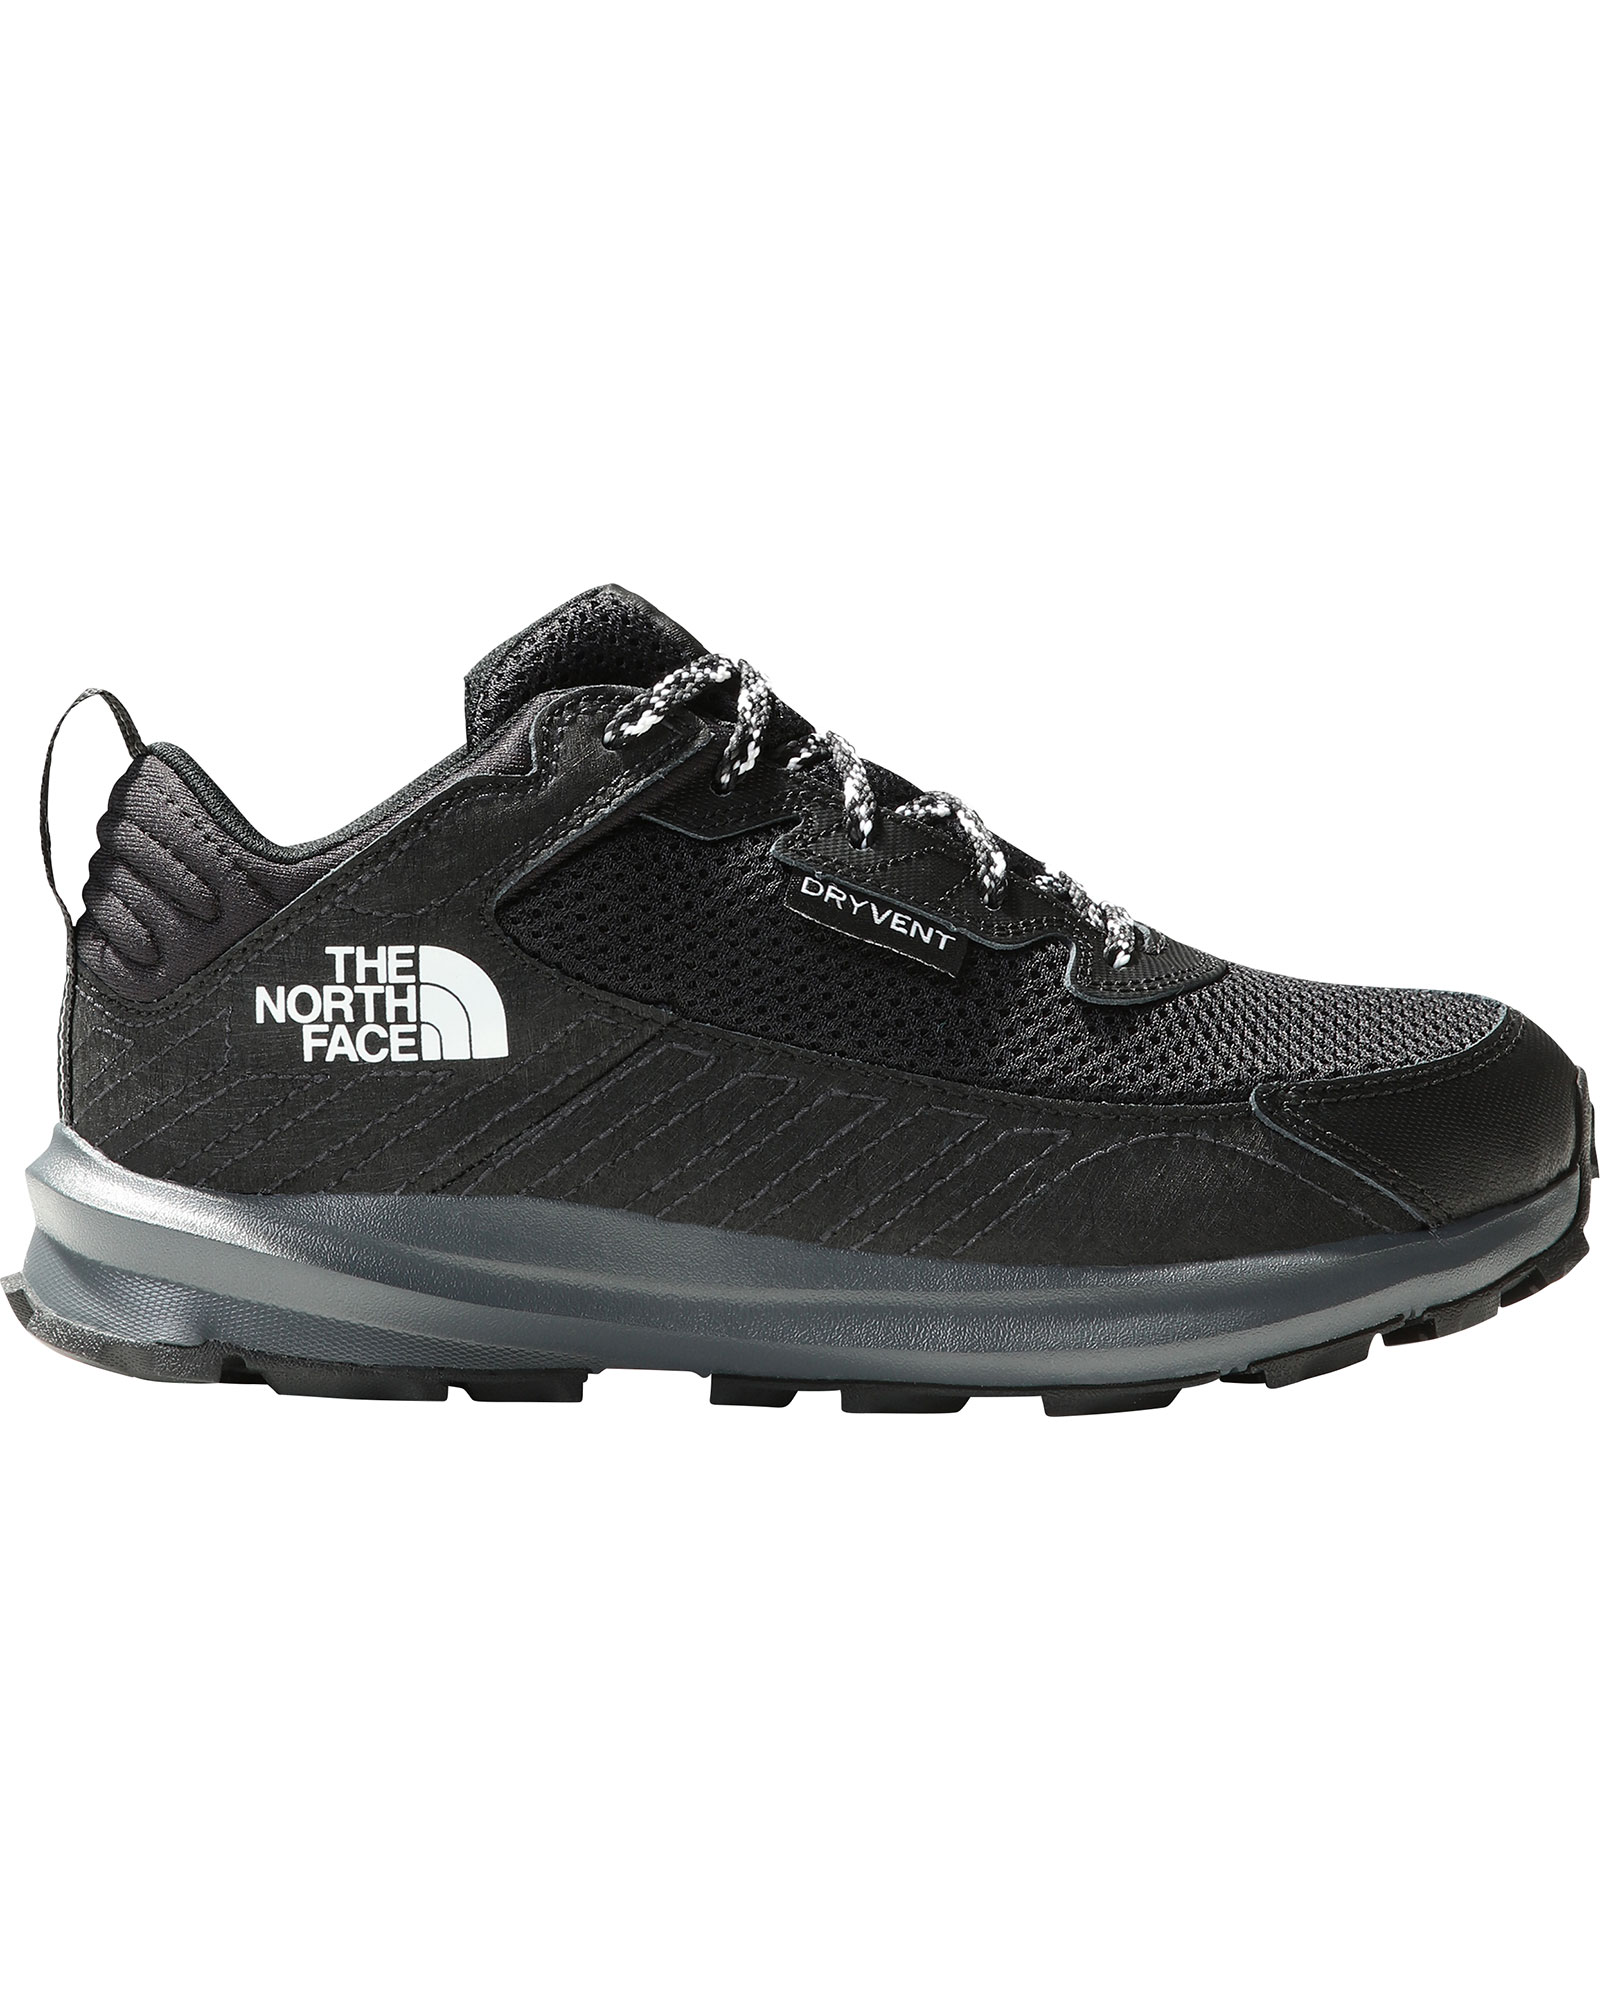 The North Face Youth Fastpack Hiker Kid’s Waterproof Shoes - TNF Black/TNF Black UK 3